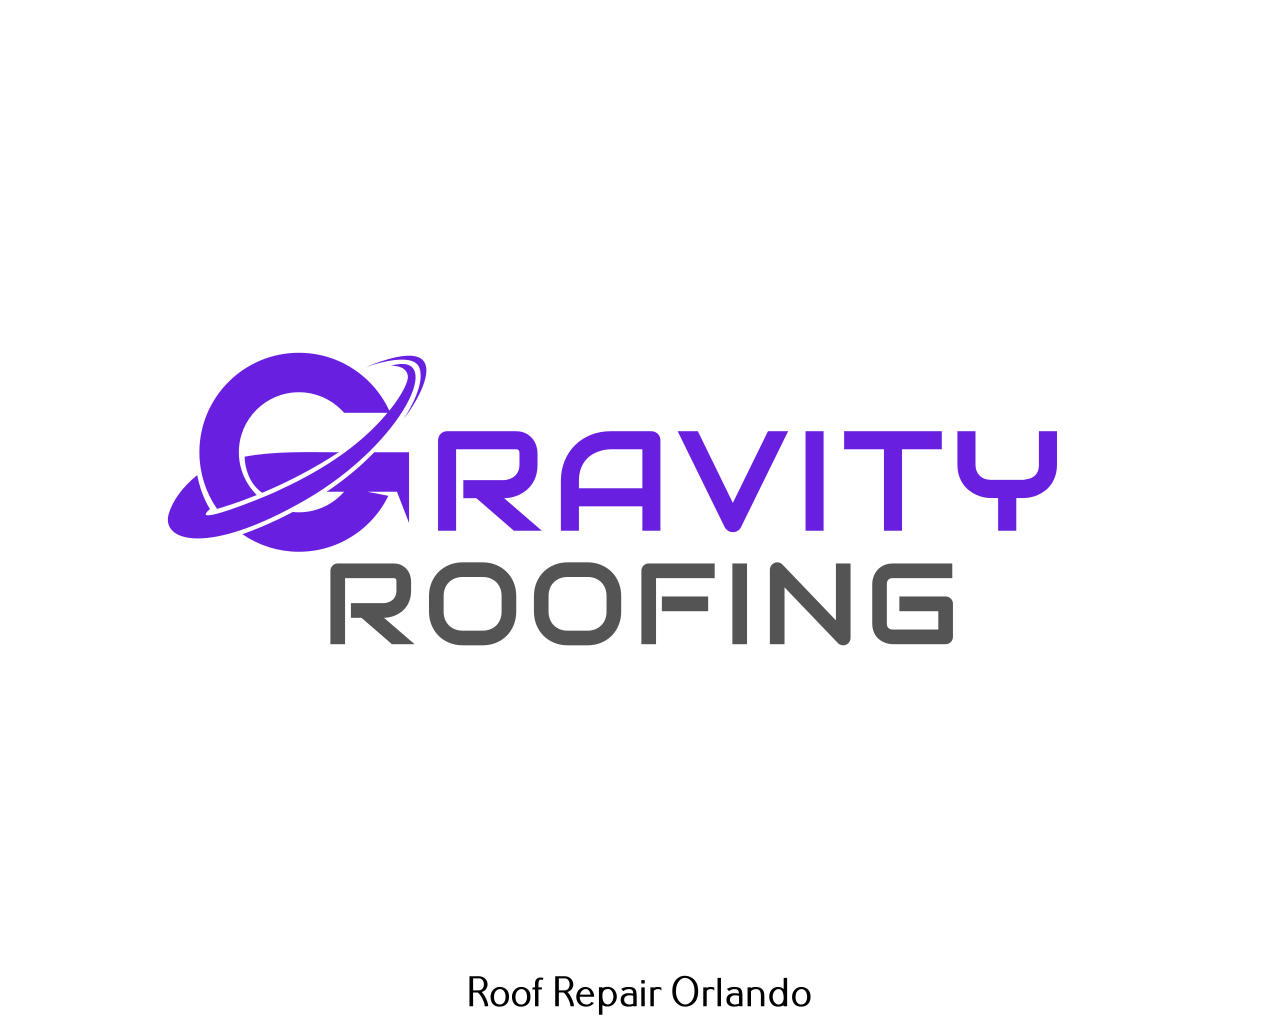 Gravity Roofing Explains How Material Selection Can Lower Roof Replacement Costs